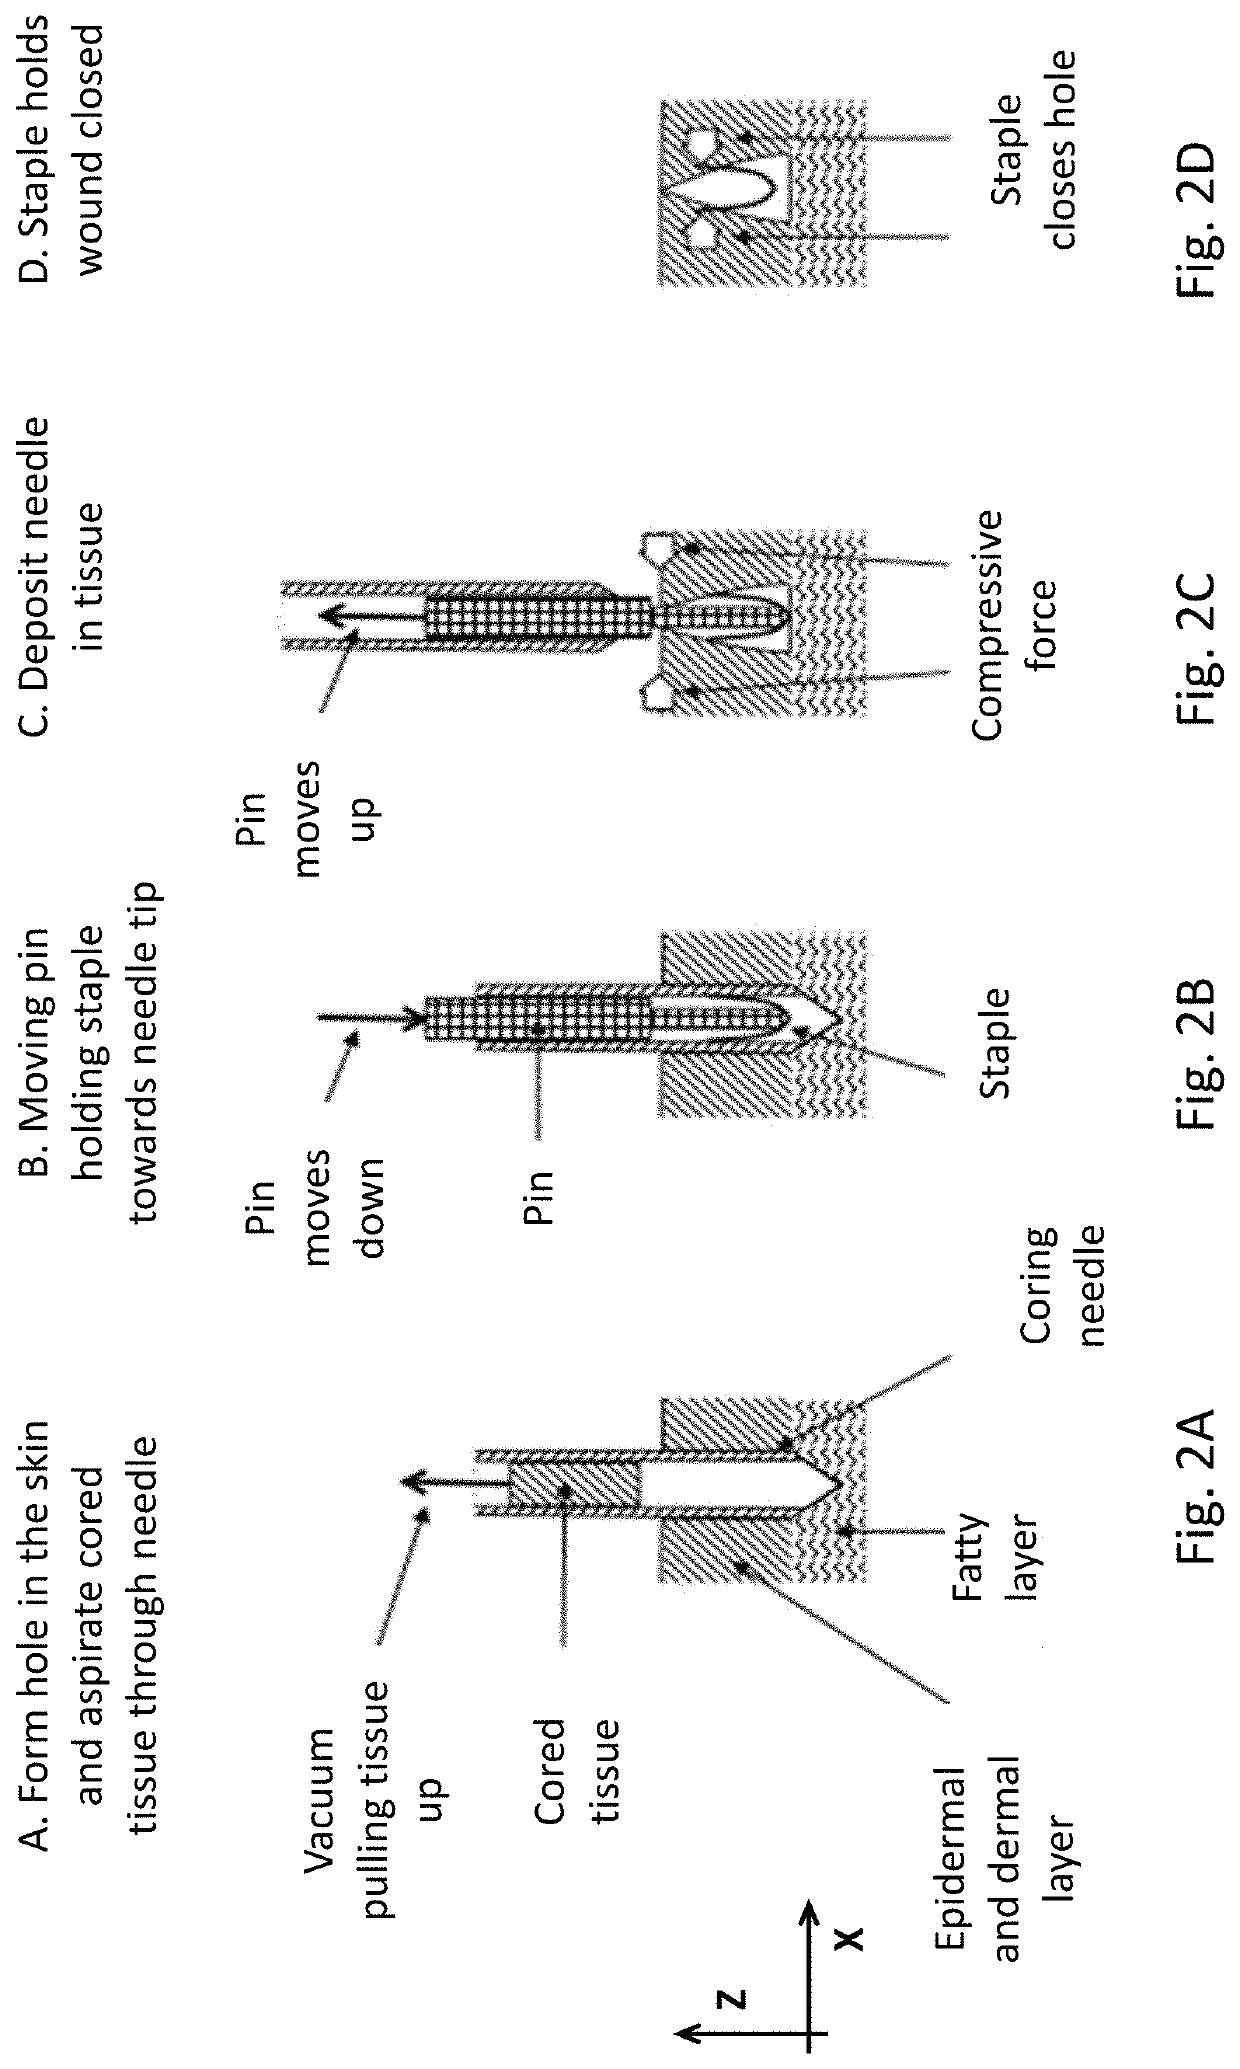 Microclosures and related methods for skin treatment